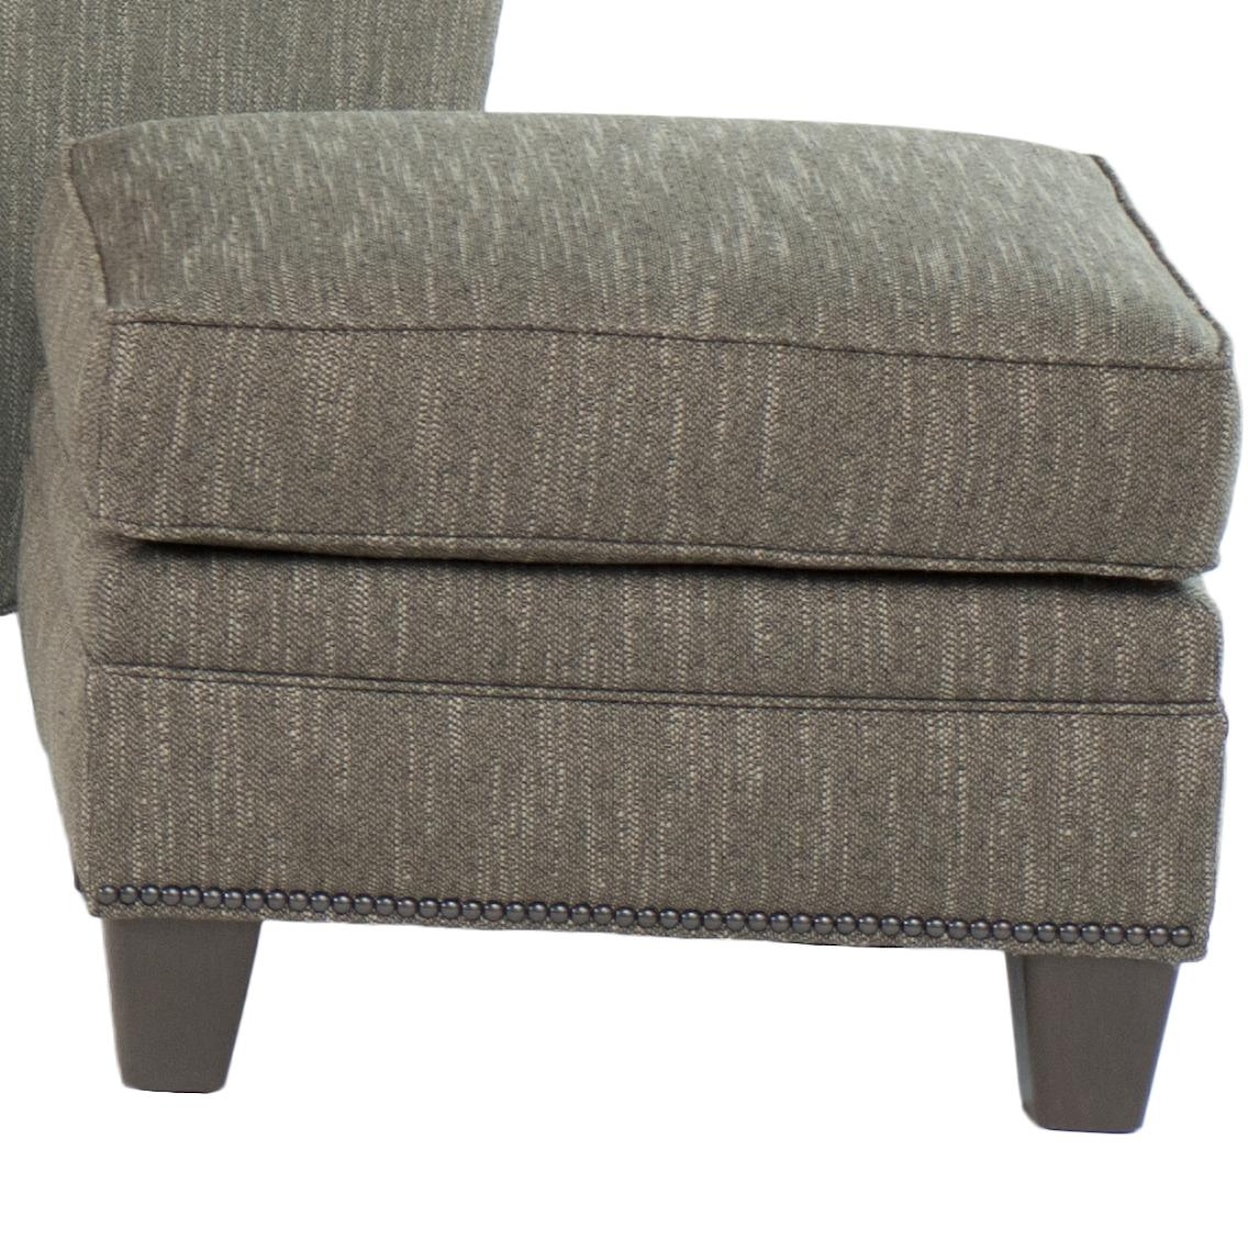 Smith Brothers 203 Transitional Ottoman